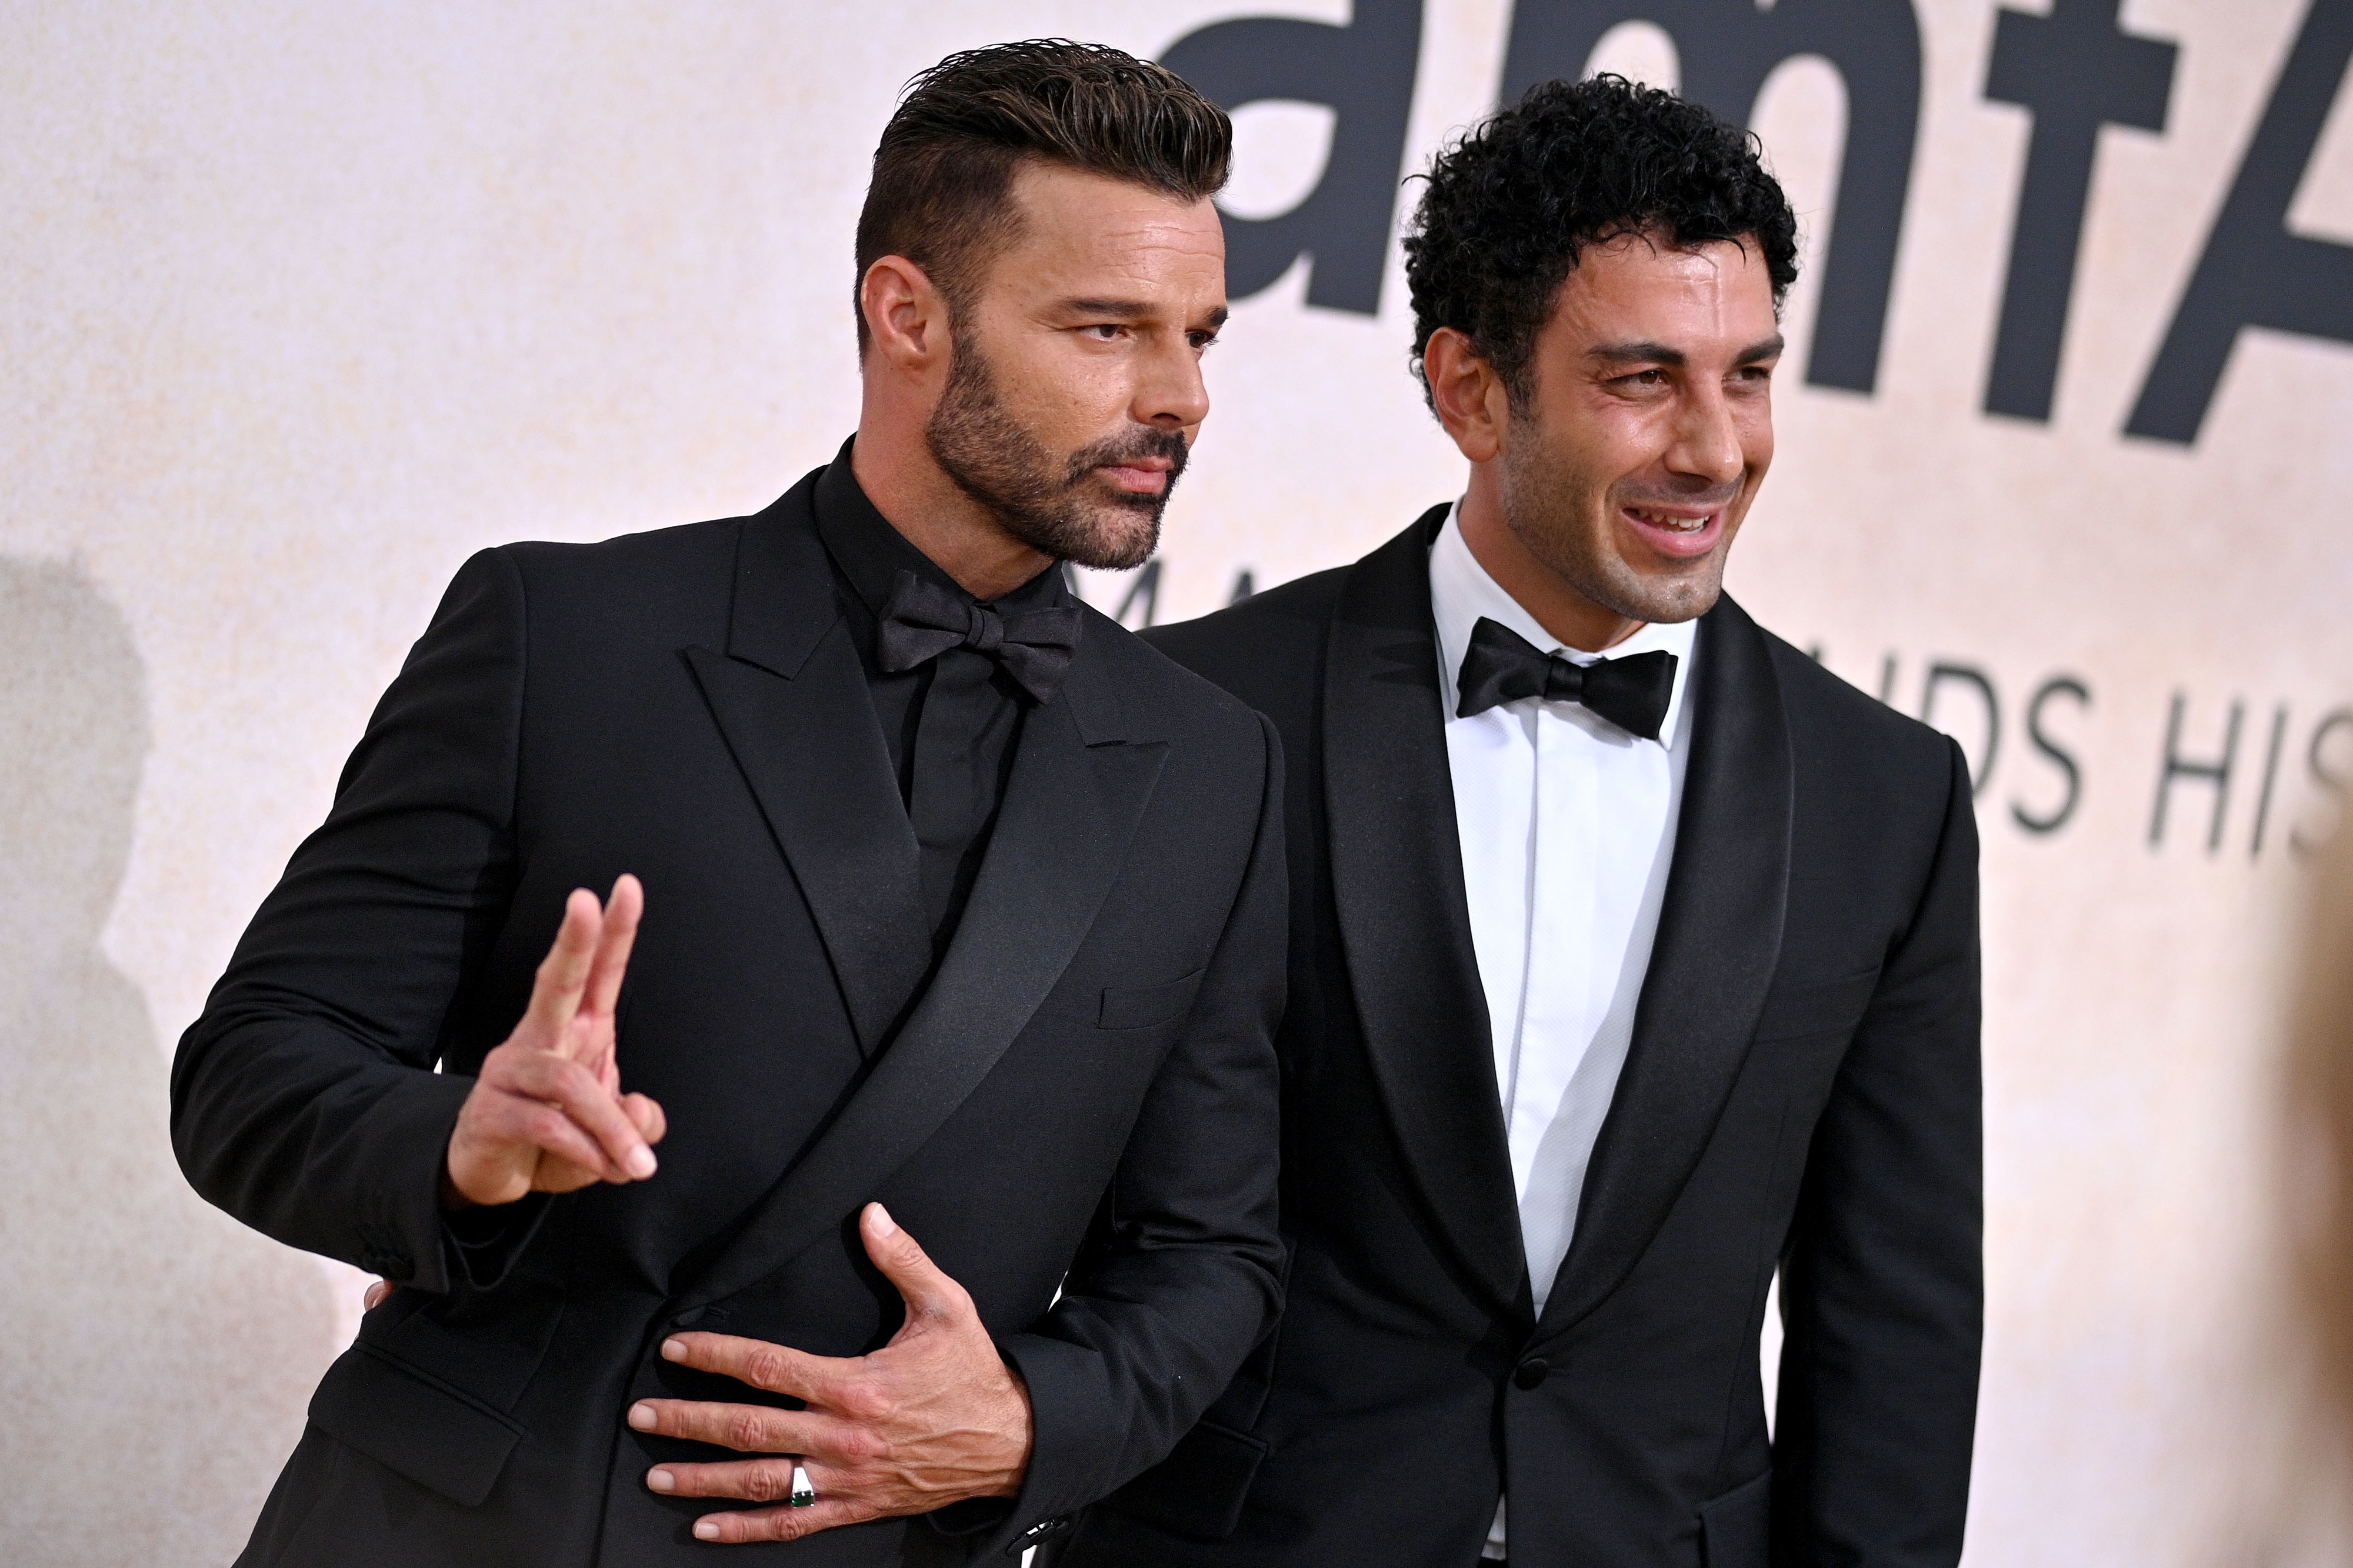 Close-up of Ricky and Jwan wearing tuxes